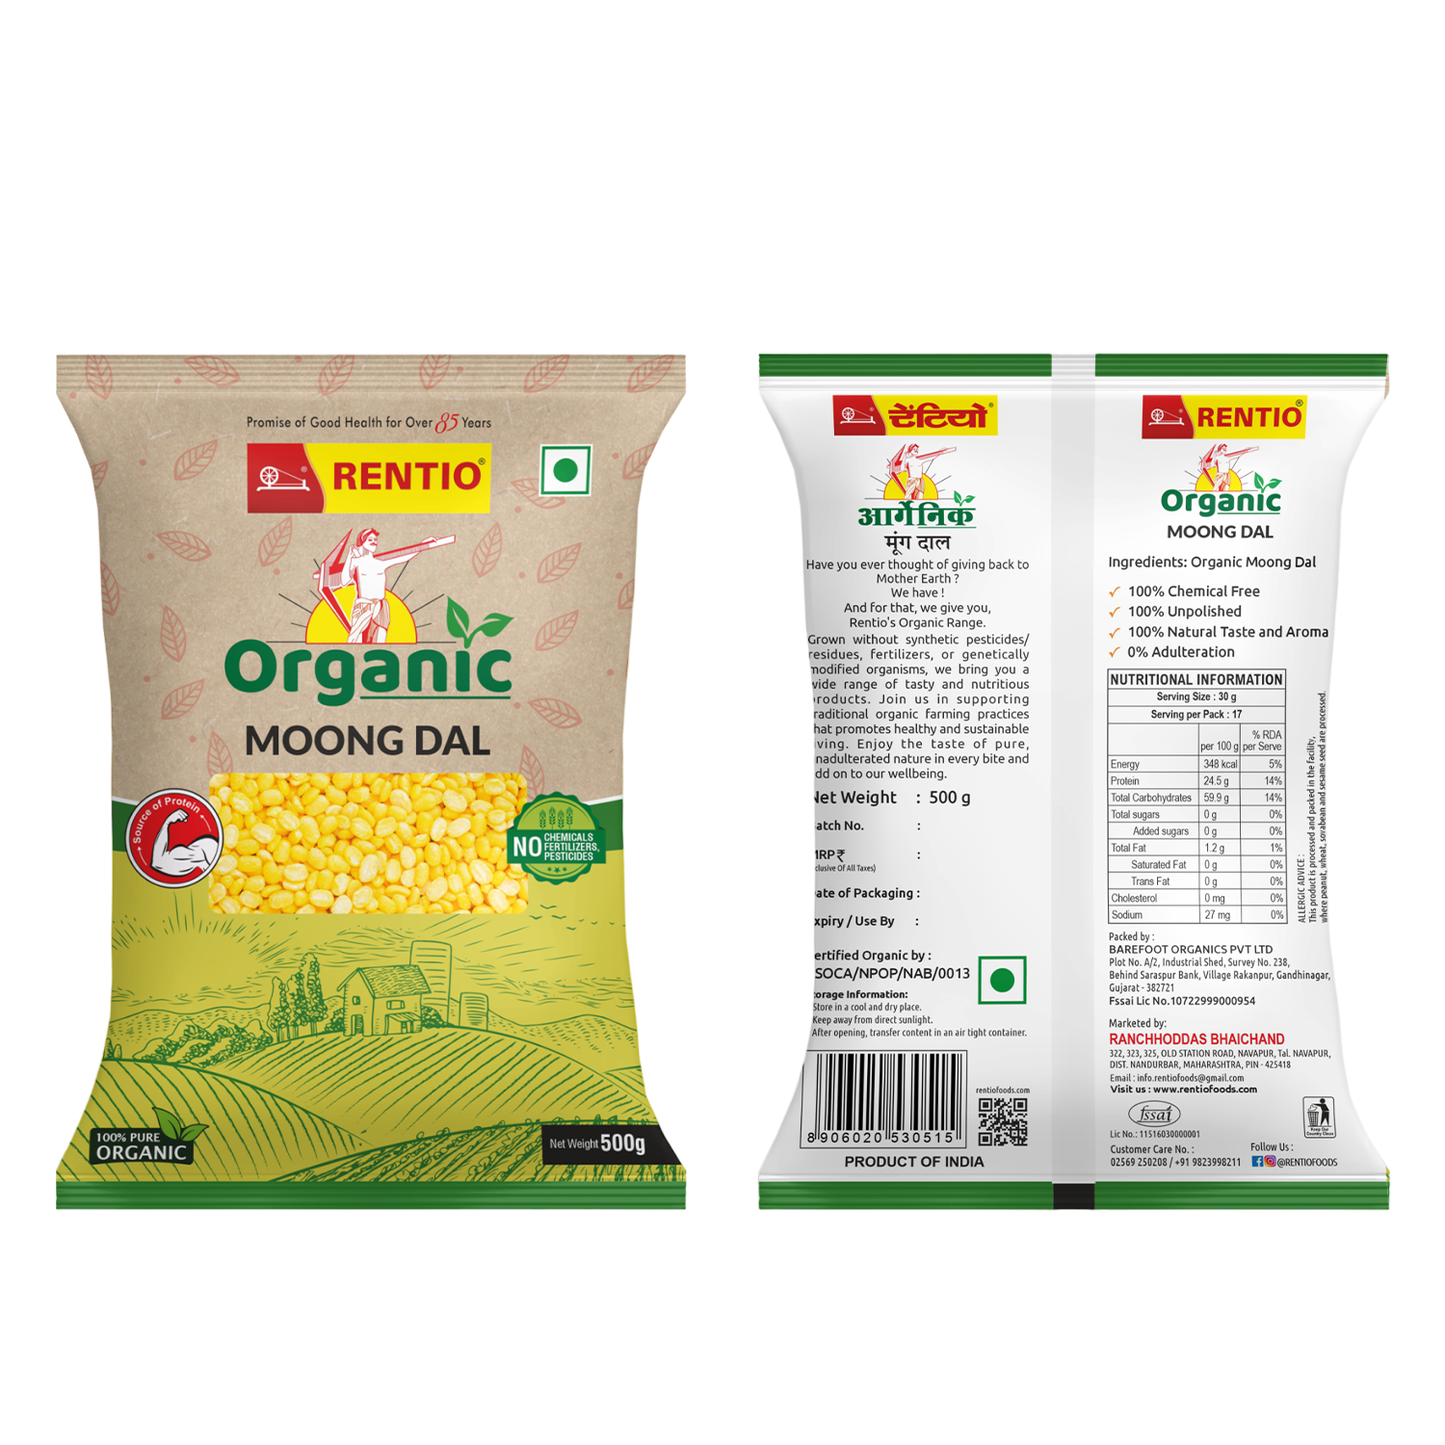 RENTIO Organic Yellow Moong Dal 1kg - Pack of 2 (500gms each)